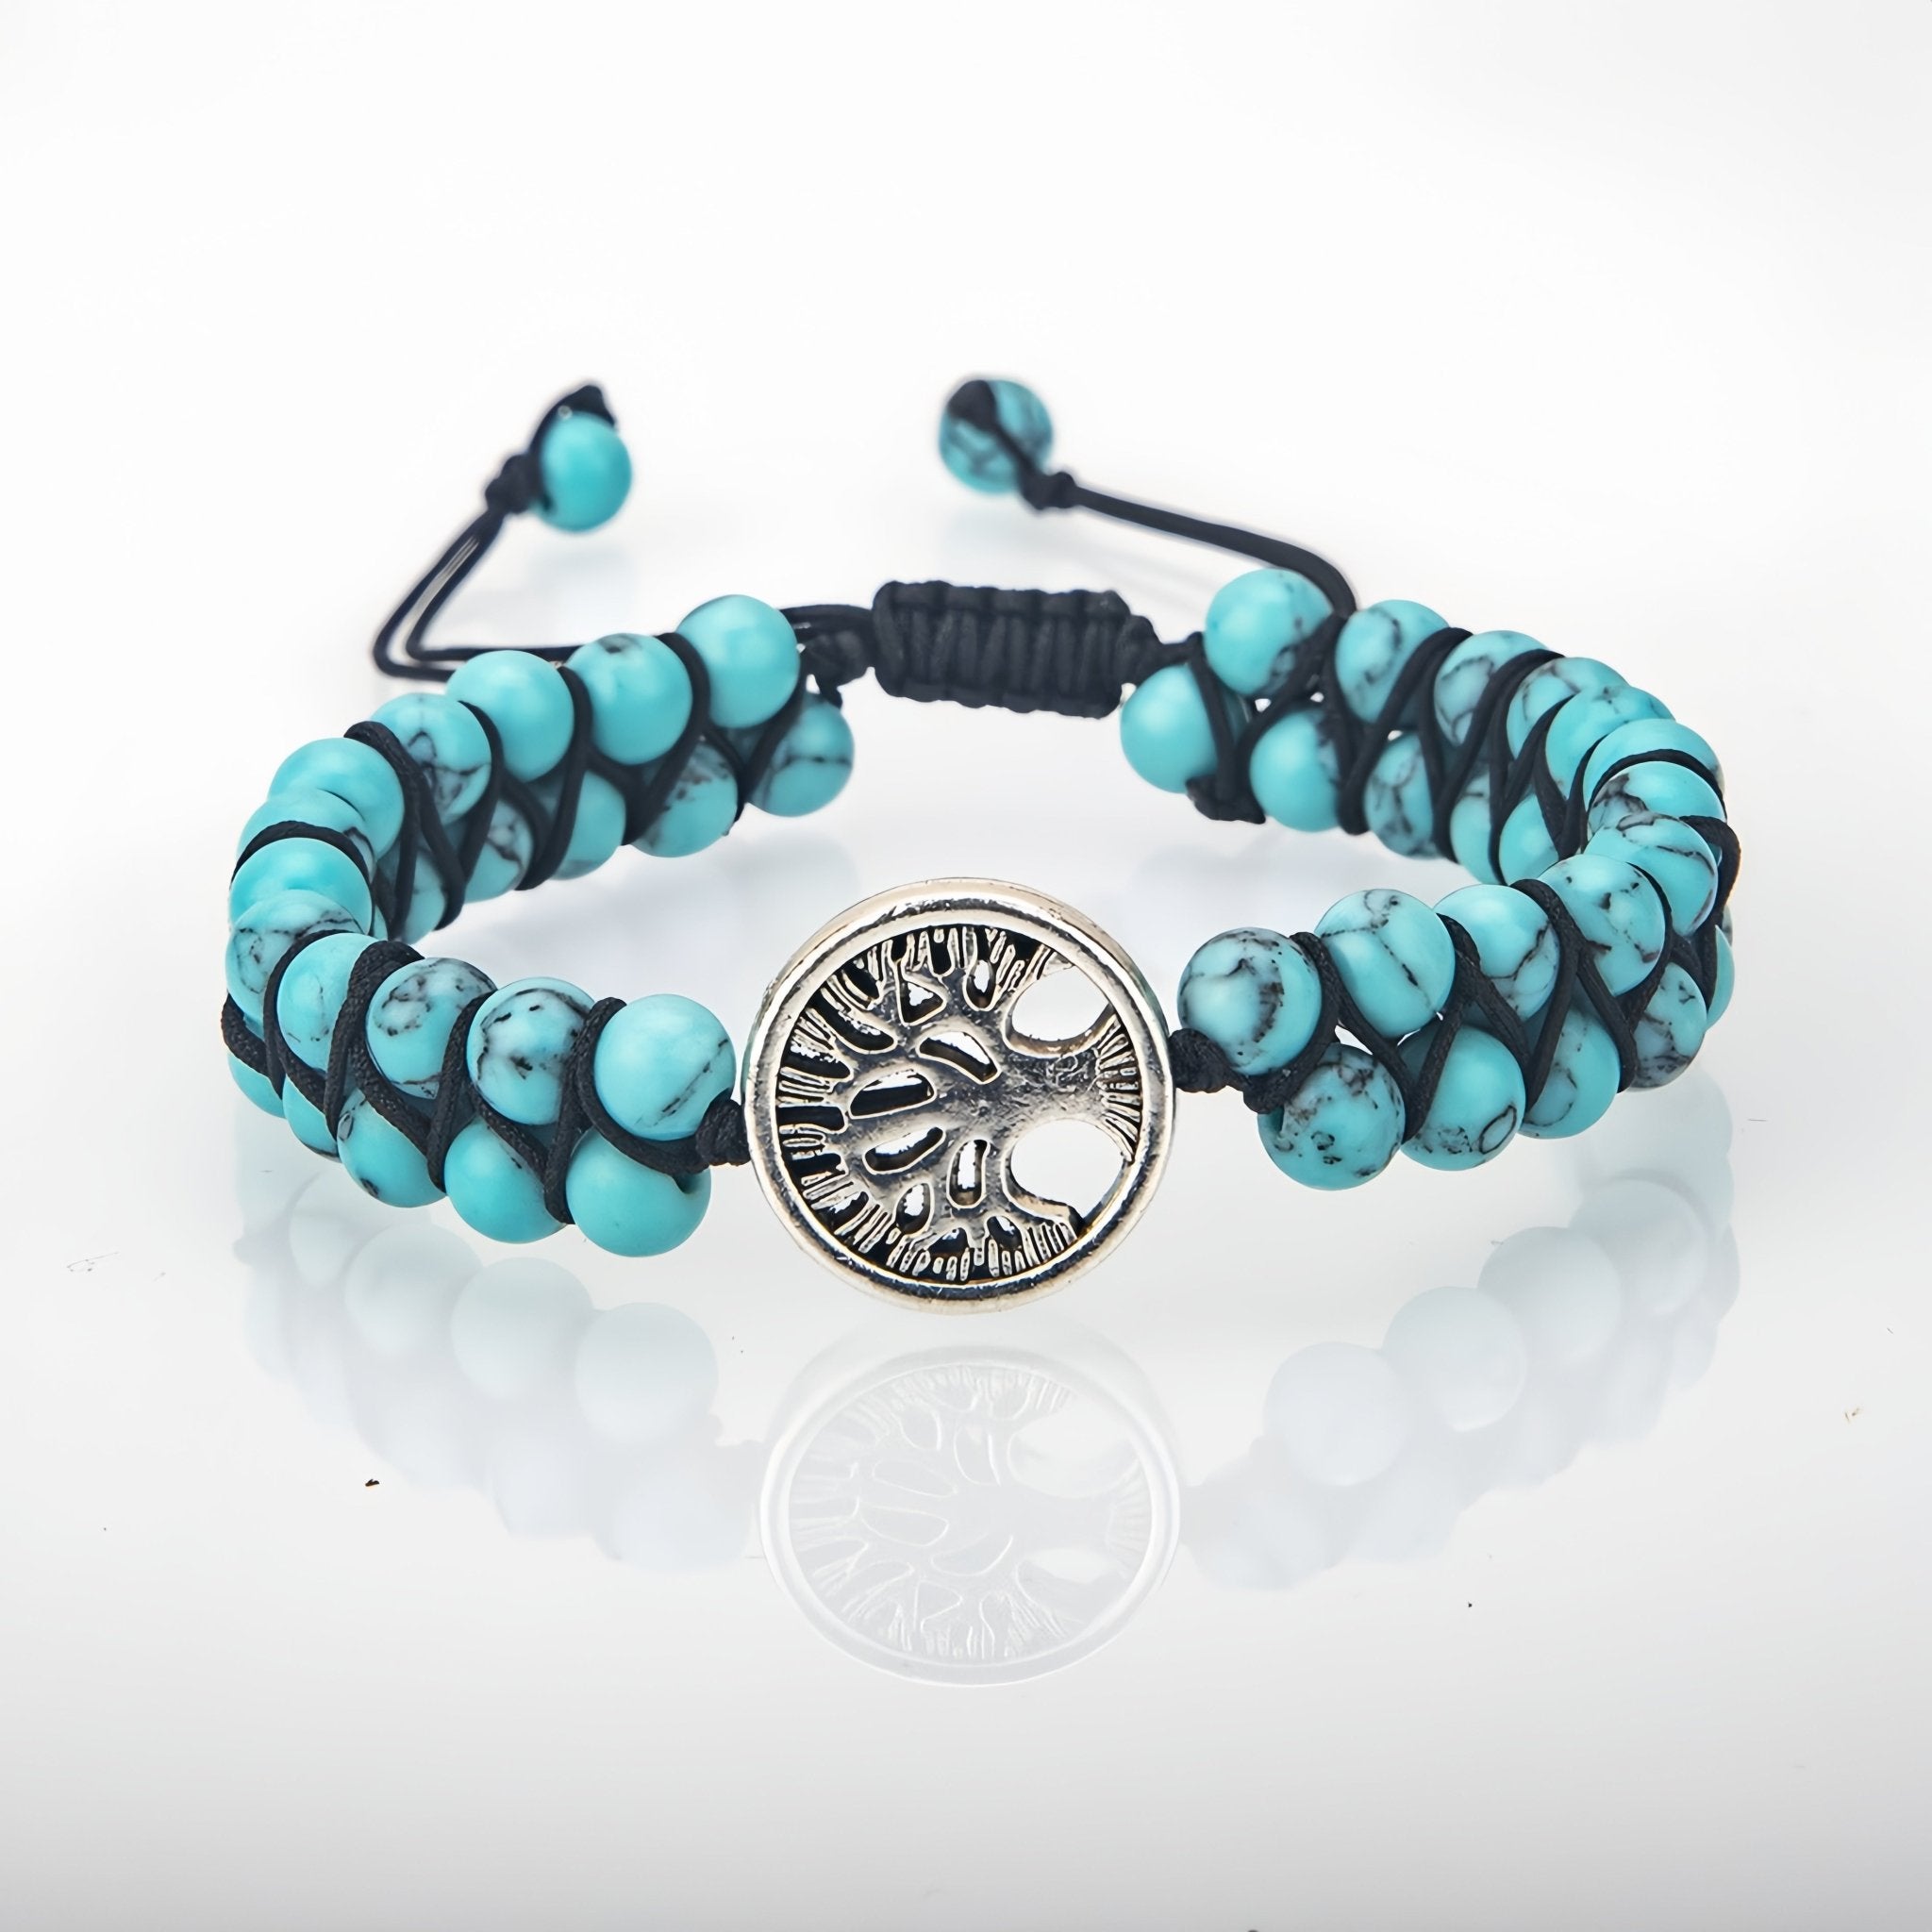 Original 6MM double-row turquoise yoga bracelet with a tree of life silver pendant, displayed on a white background.